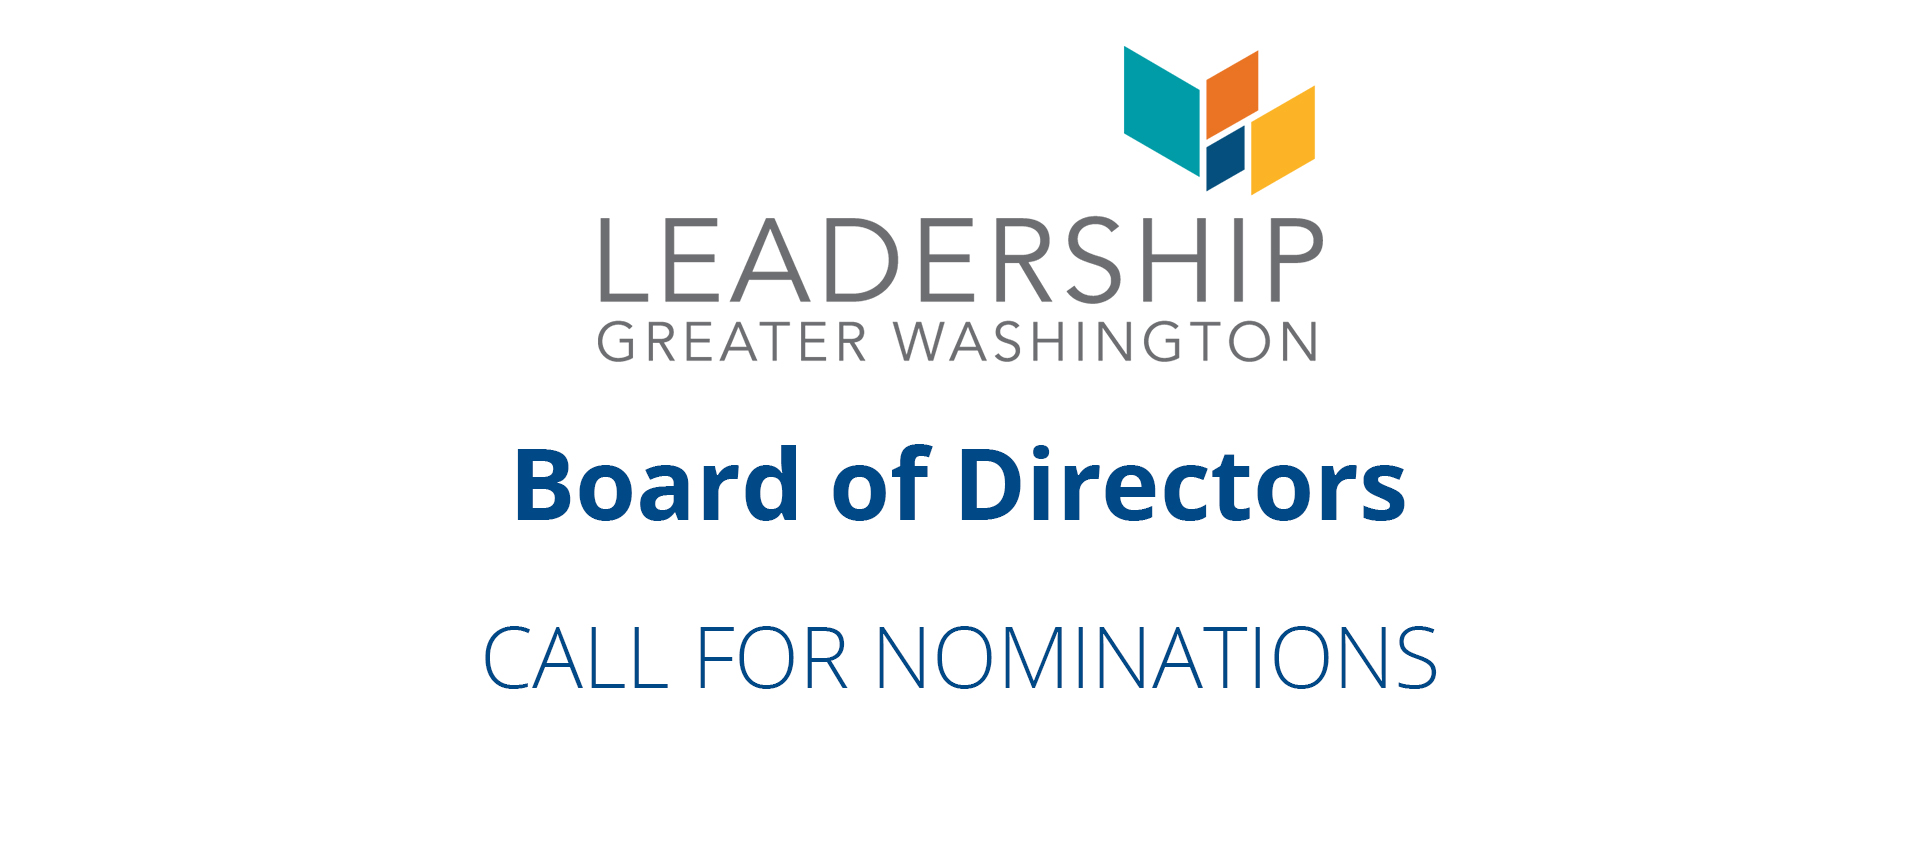 Board of Directors - Call for Nominations